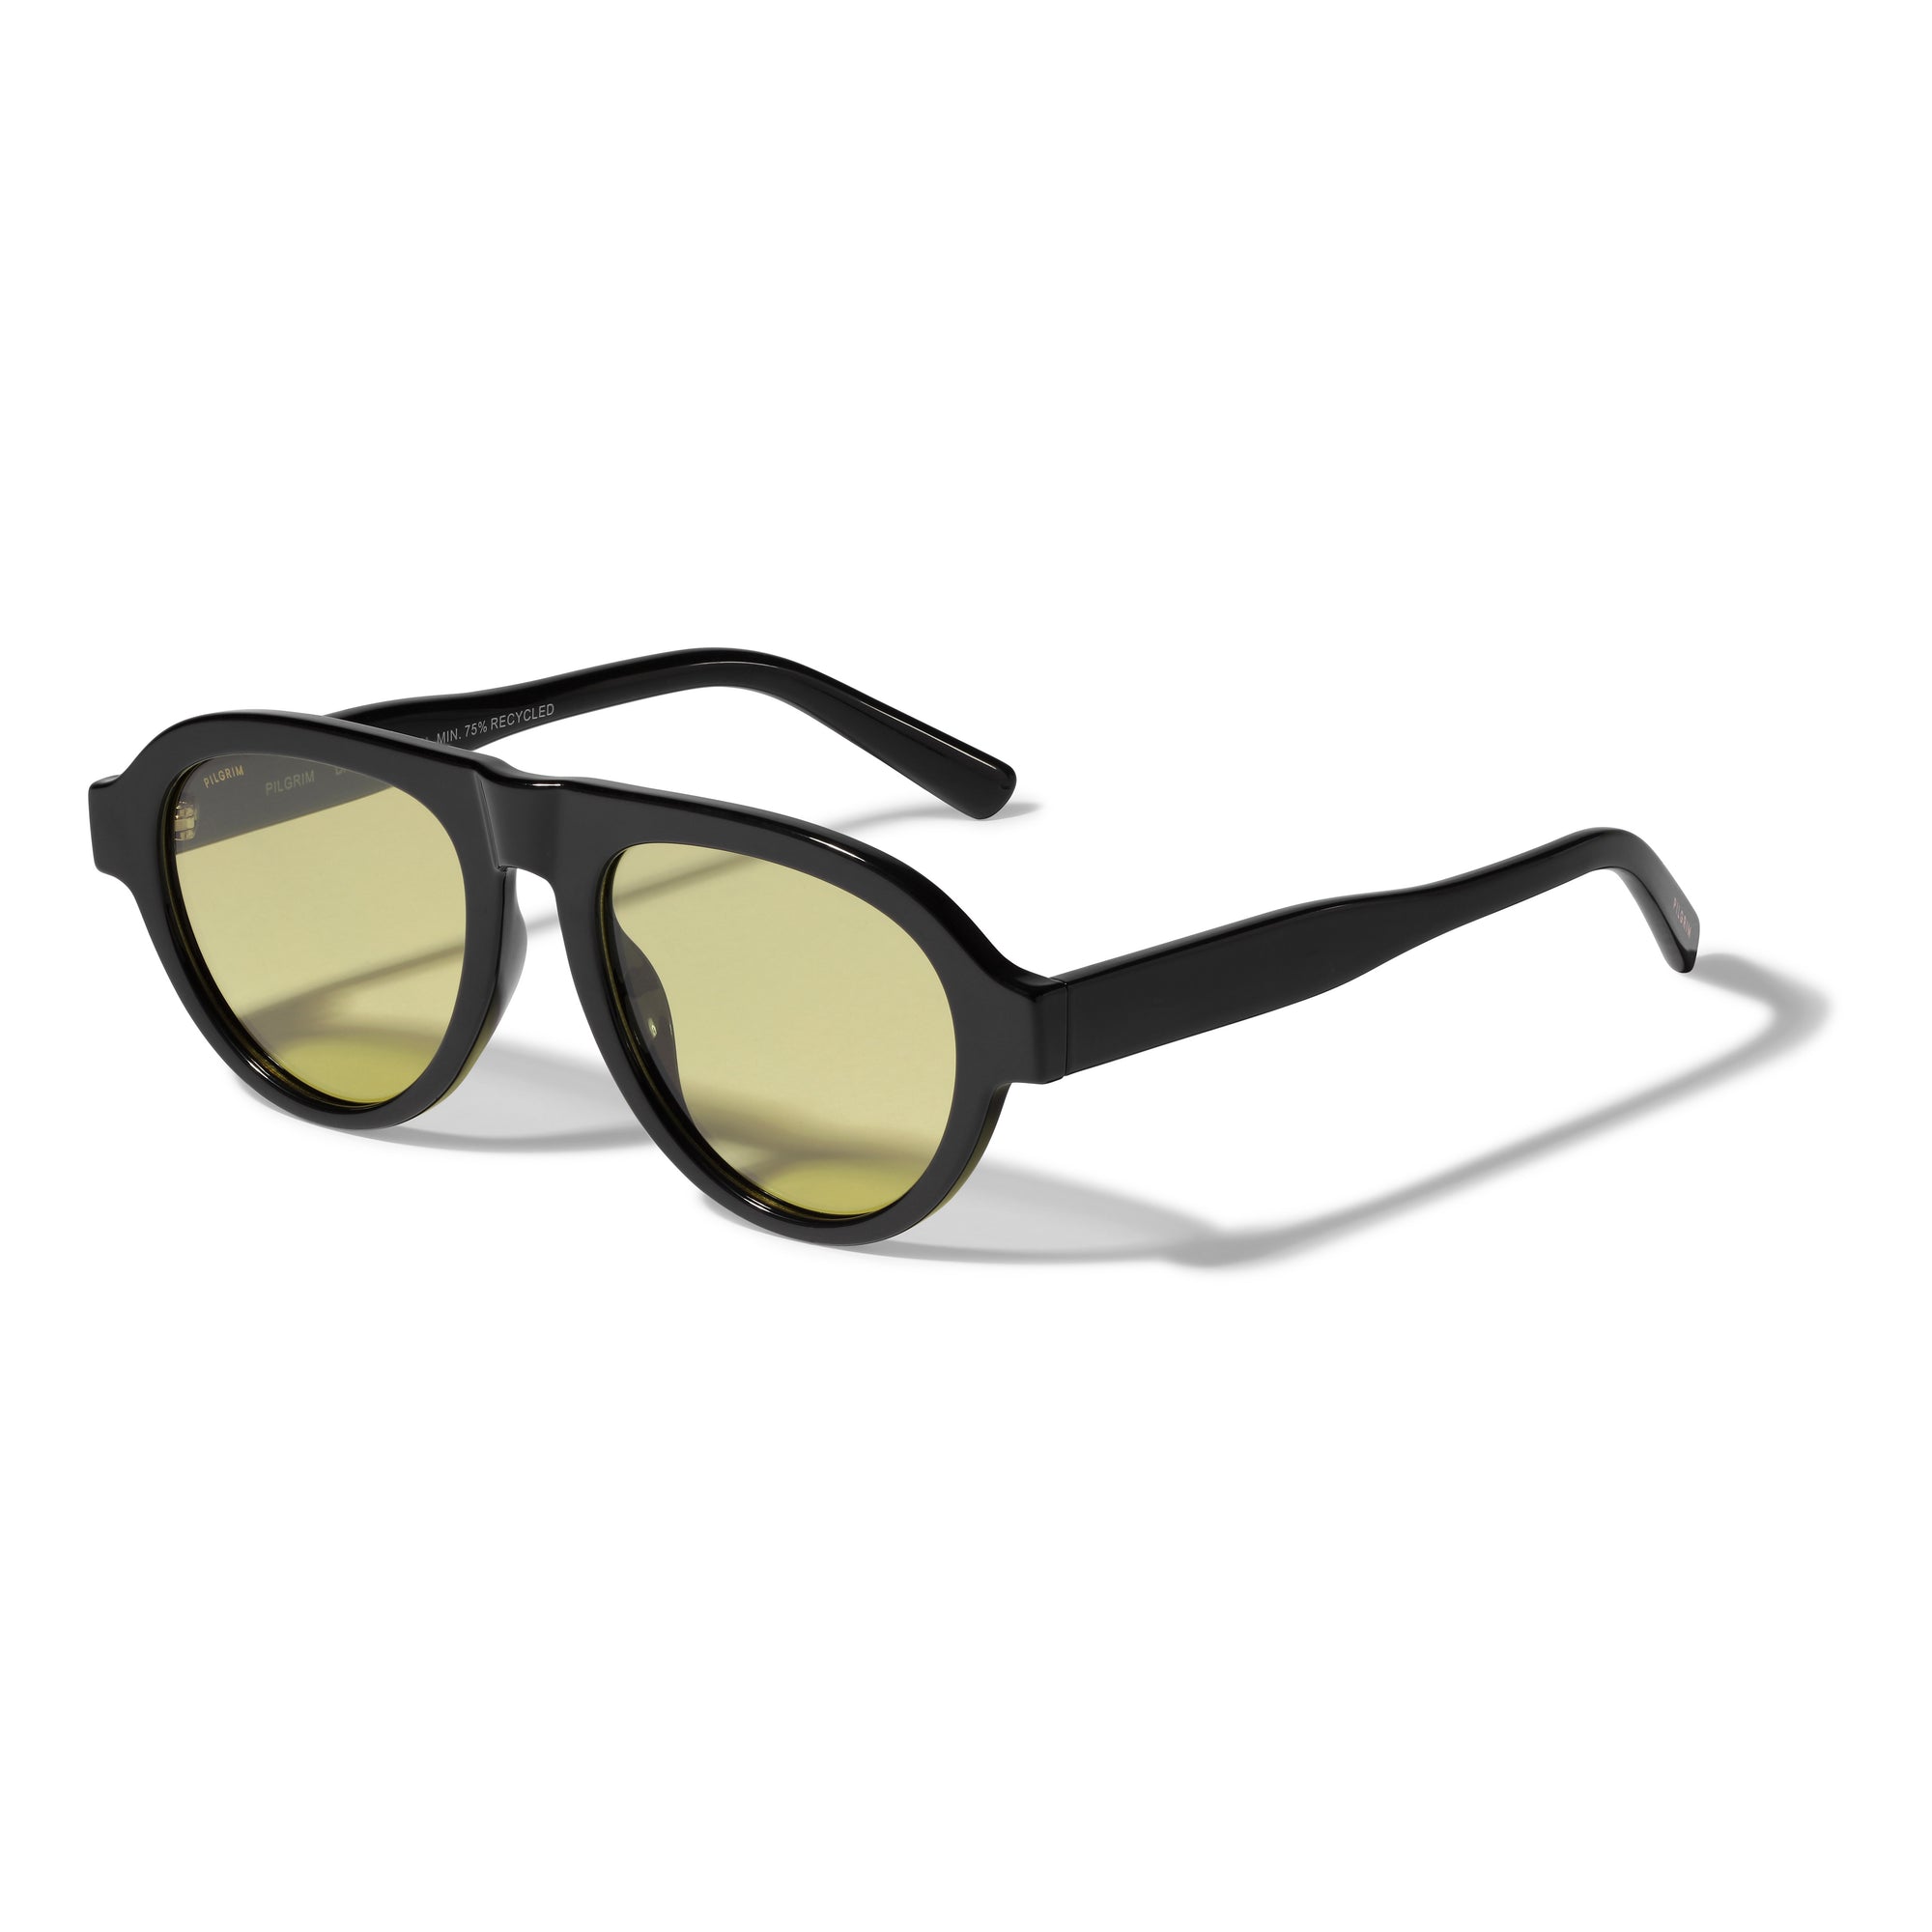 YARIL recycled sunglasses black